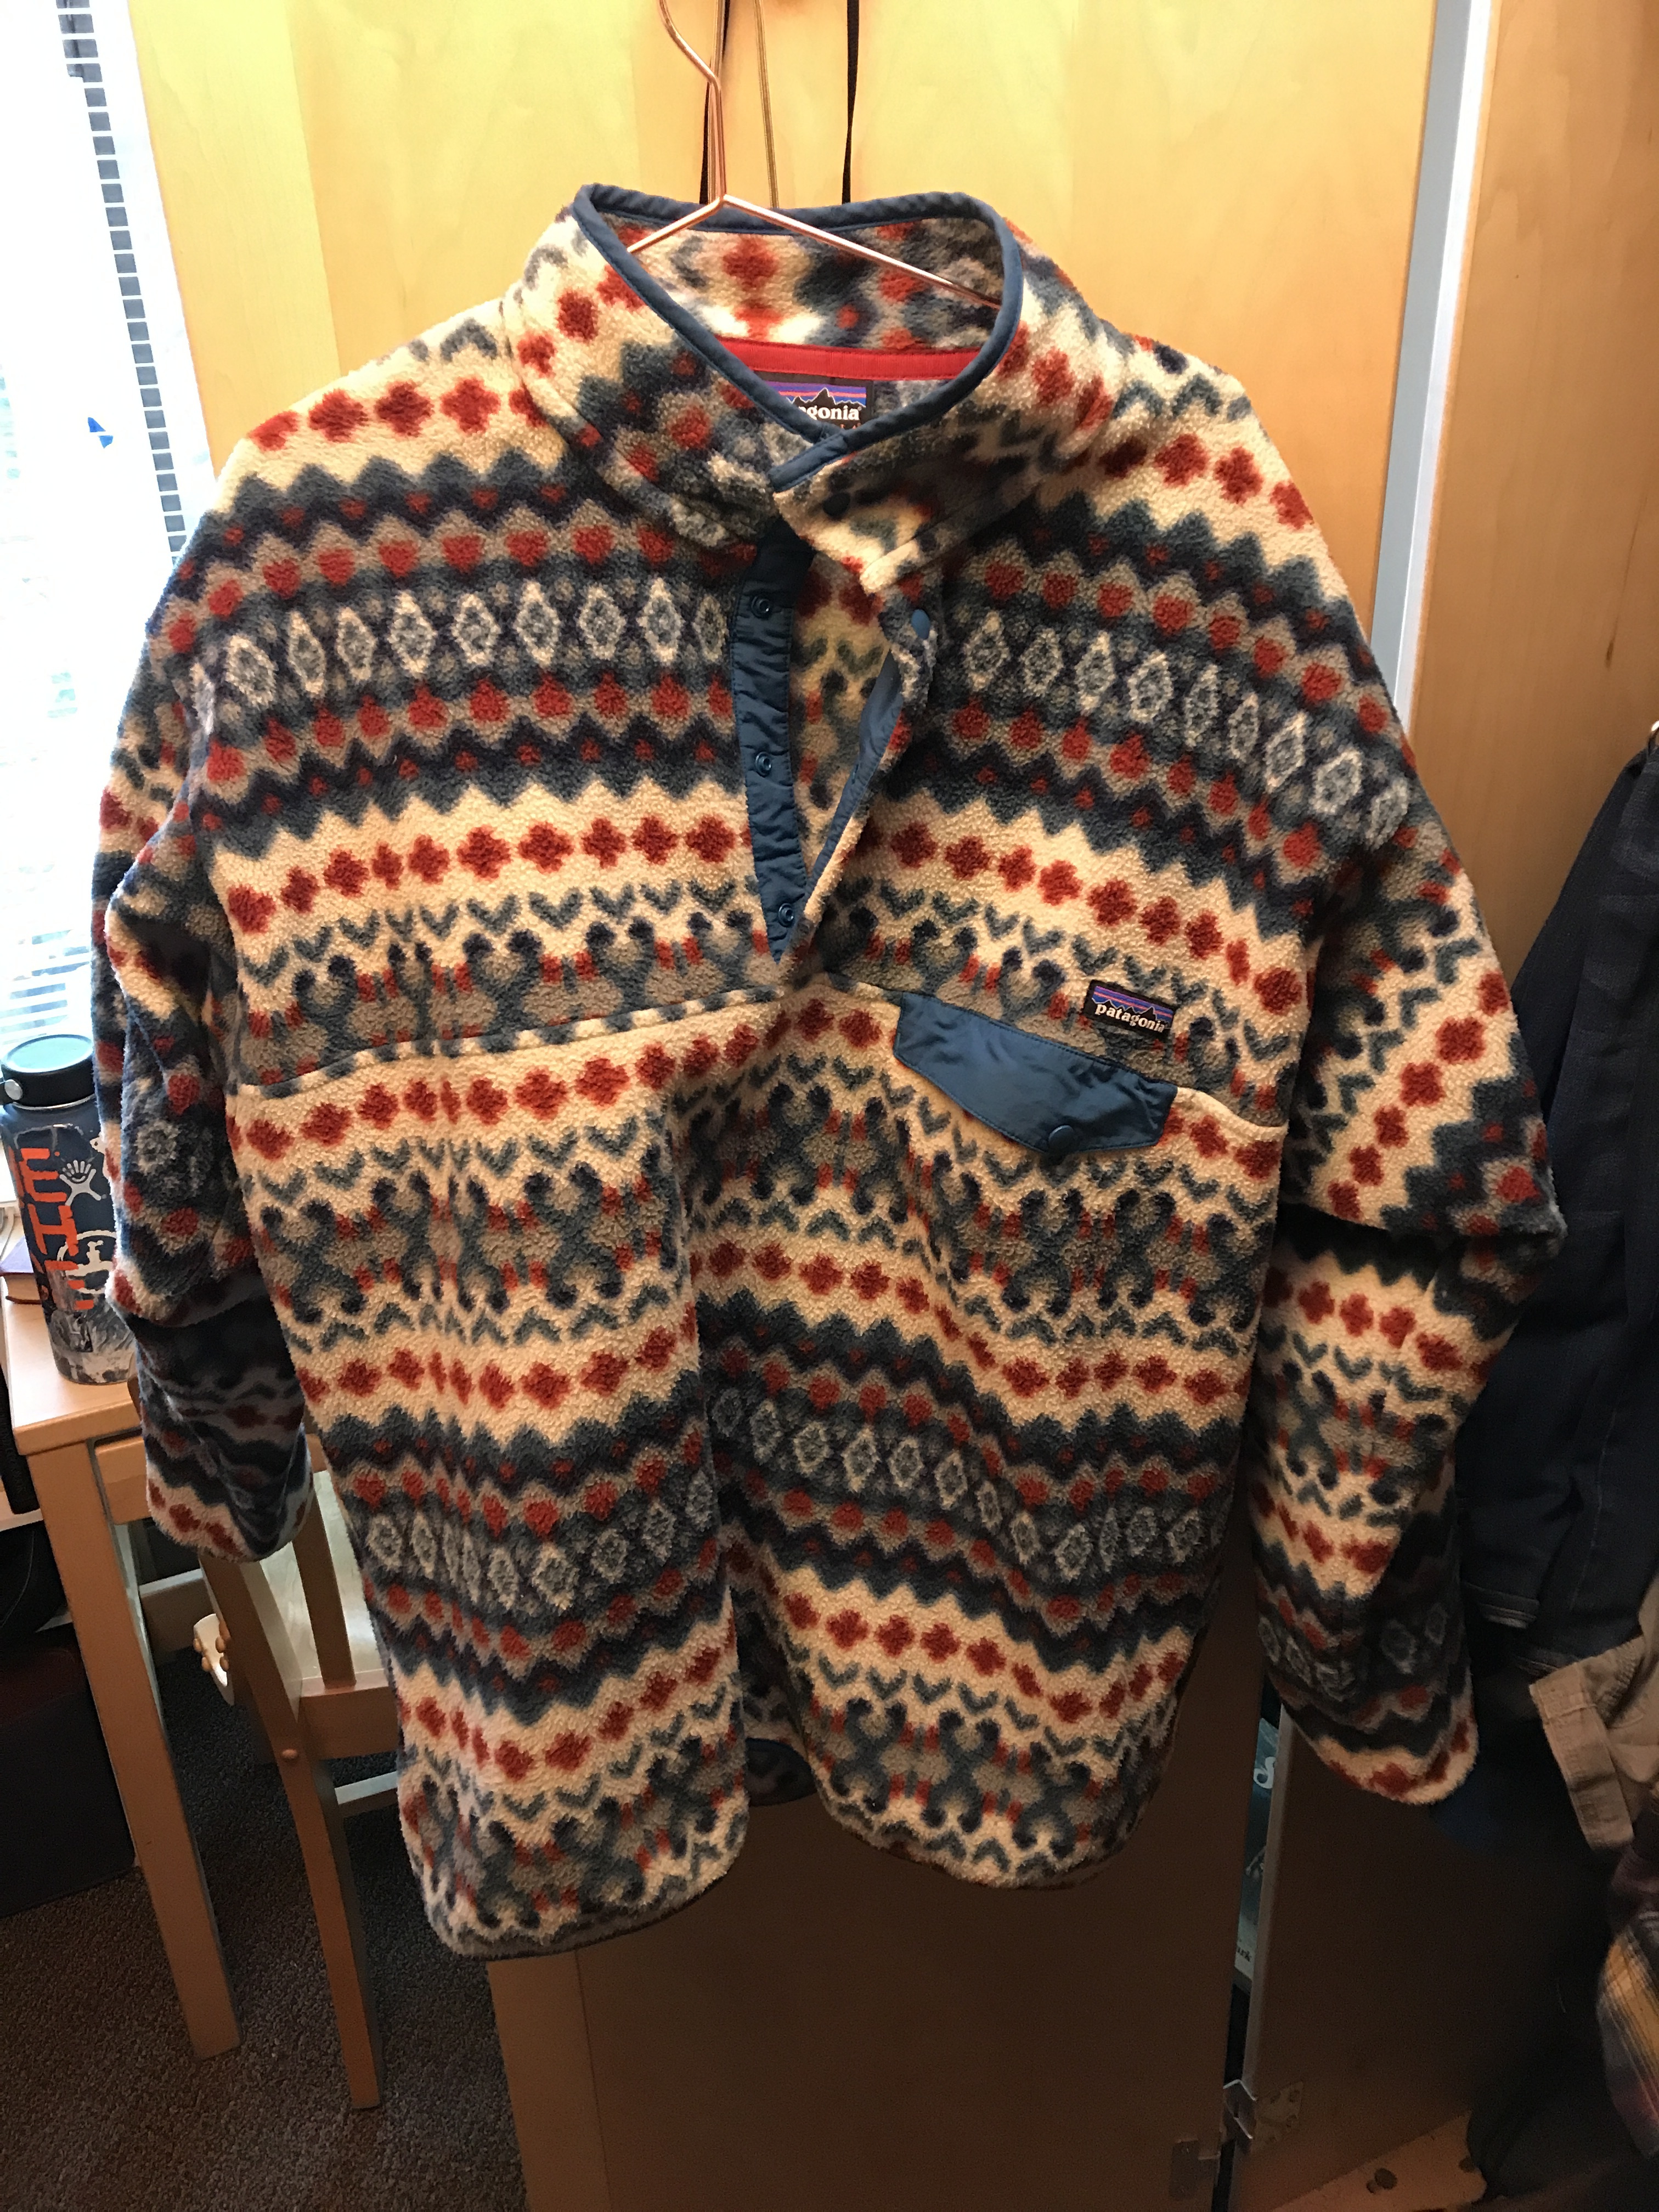 Gear Sale: Patagonia, Patagonia, and more... - Sell and Trade ...